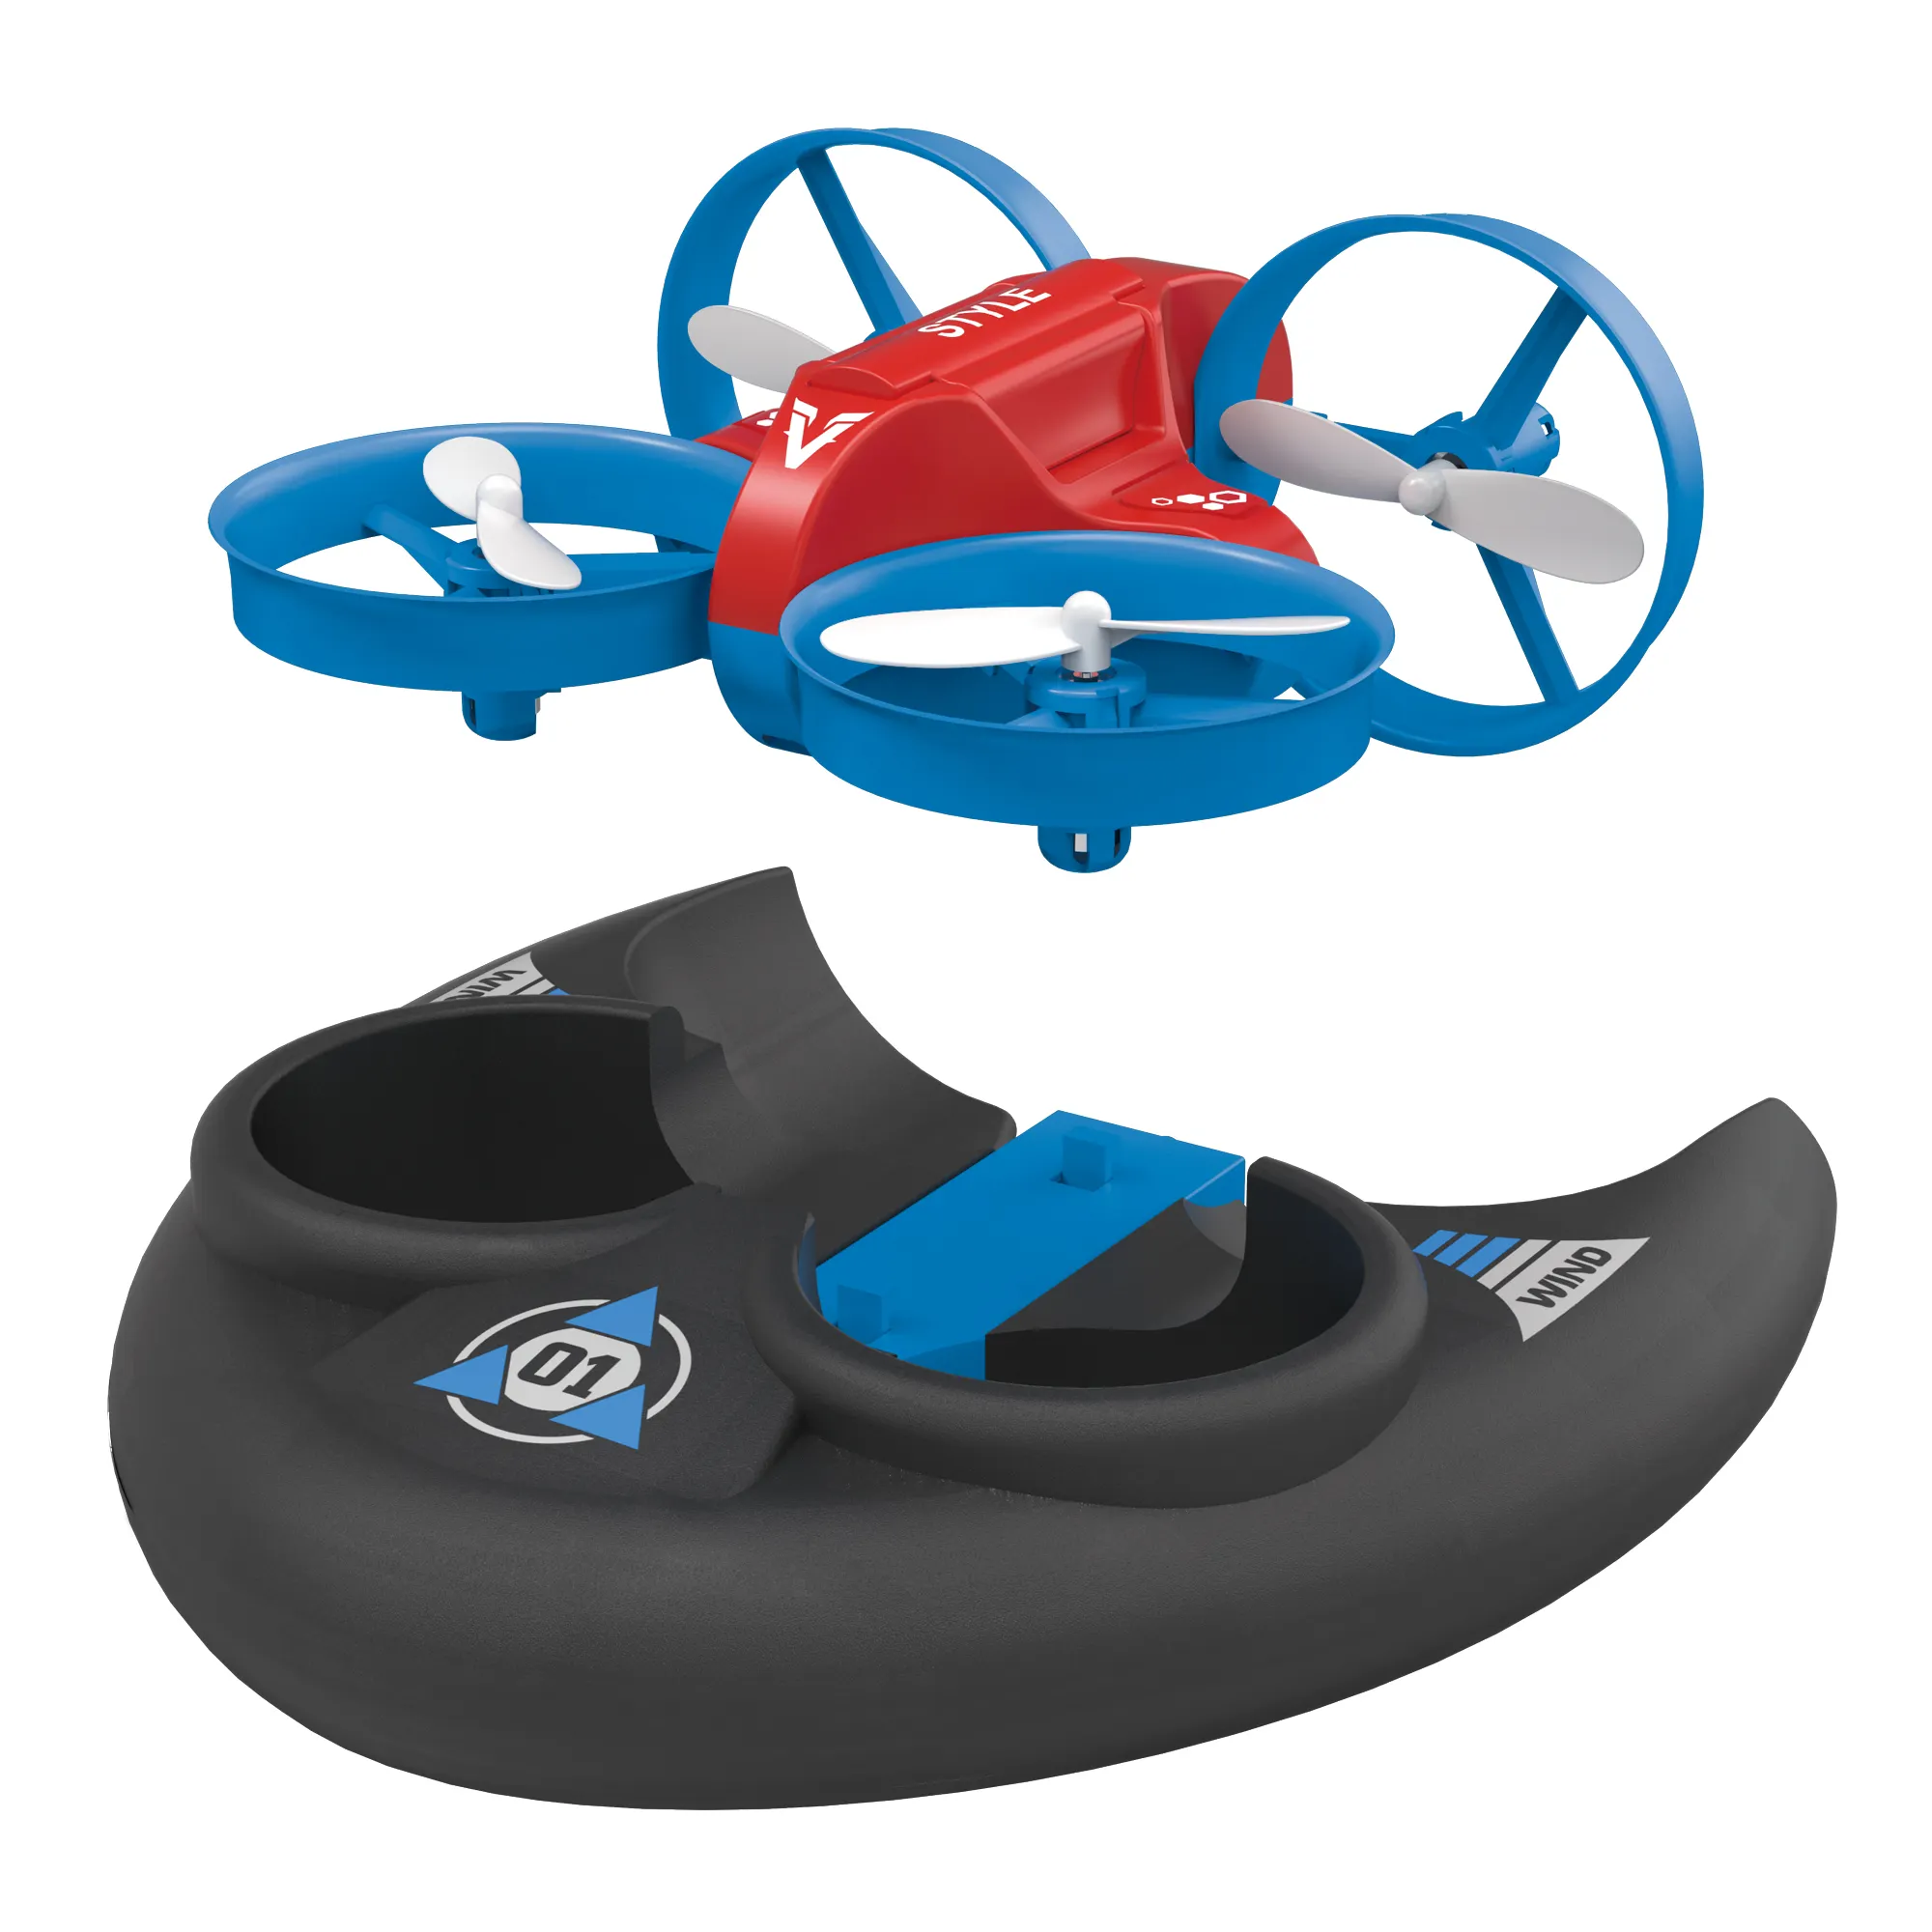 2022 Hot Selling JJRC Waterproof Remote Control Mini Drone Car Boat 3 in 1 RC Vehicle Child Toy Aircraft